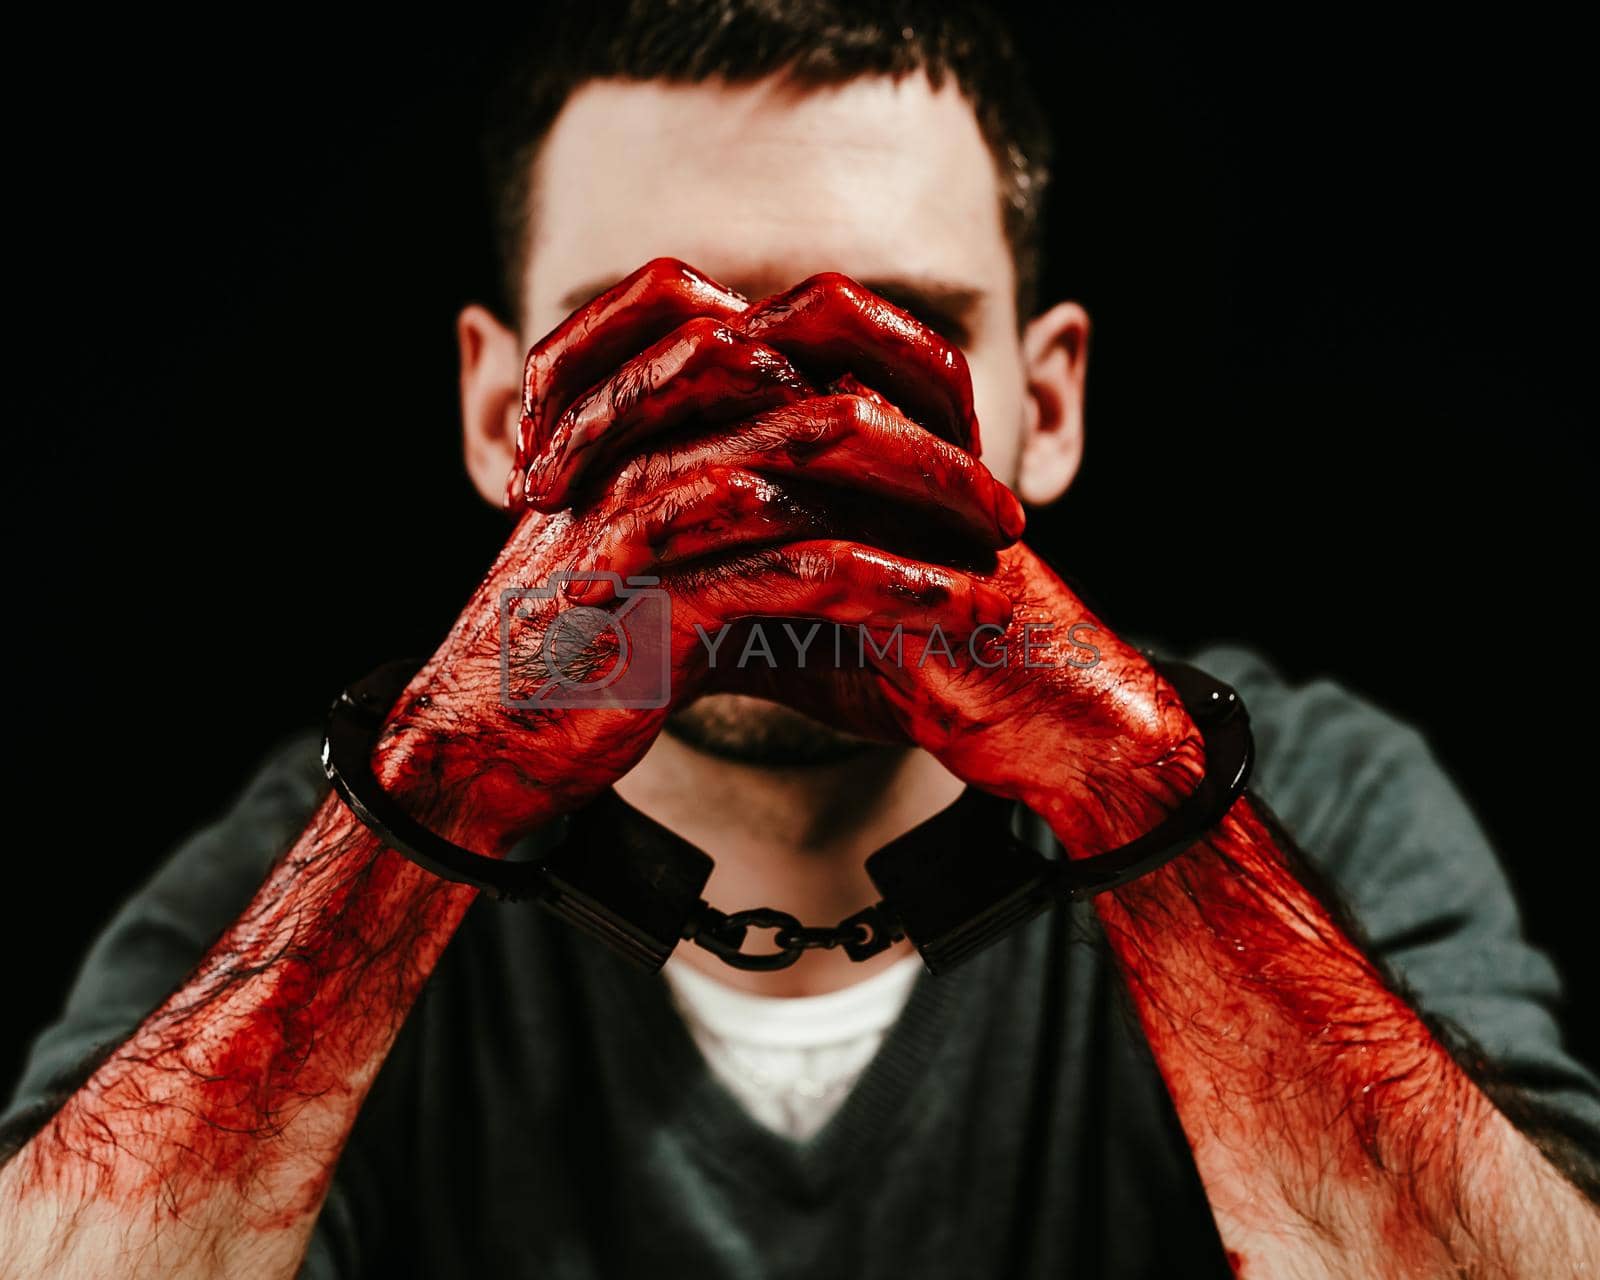 Royalty free image of Portrait of a man with bloody hands handcuffed. by mrwed54